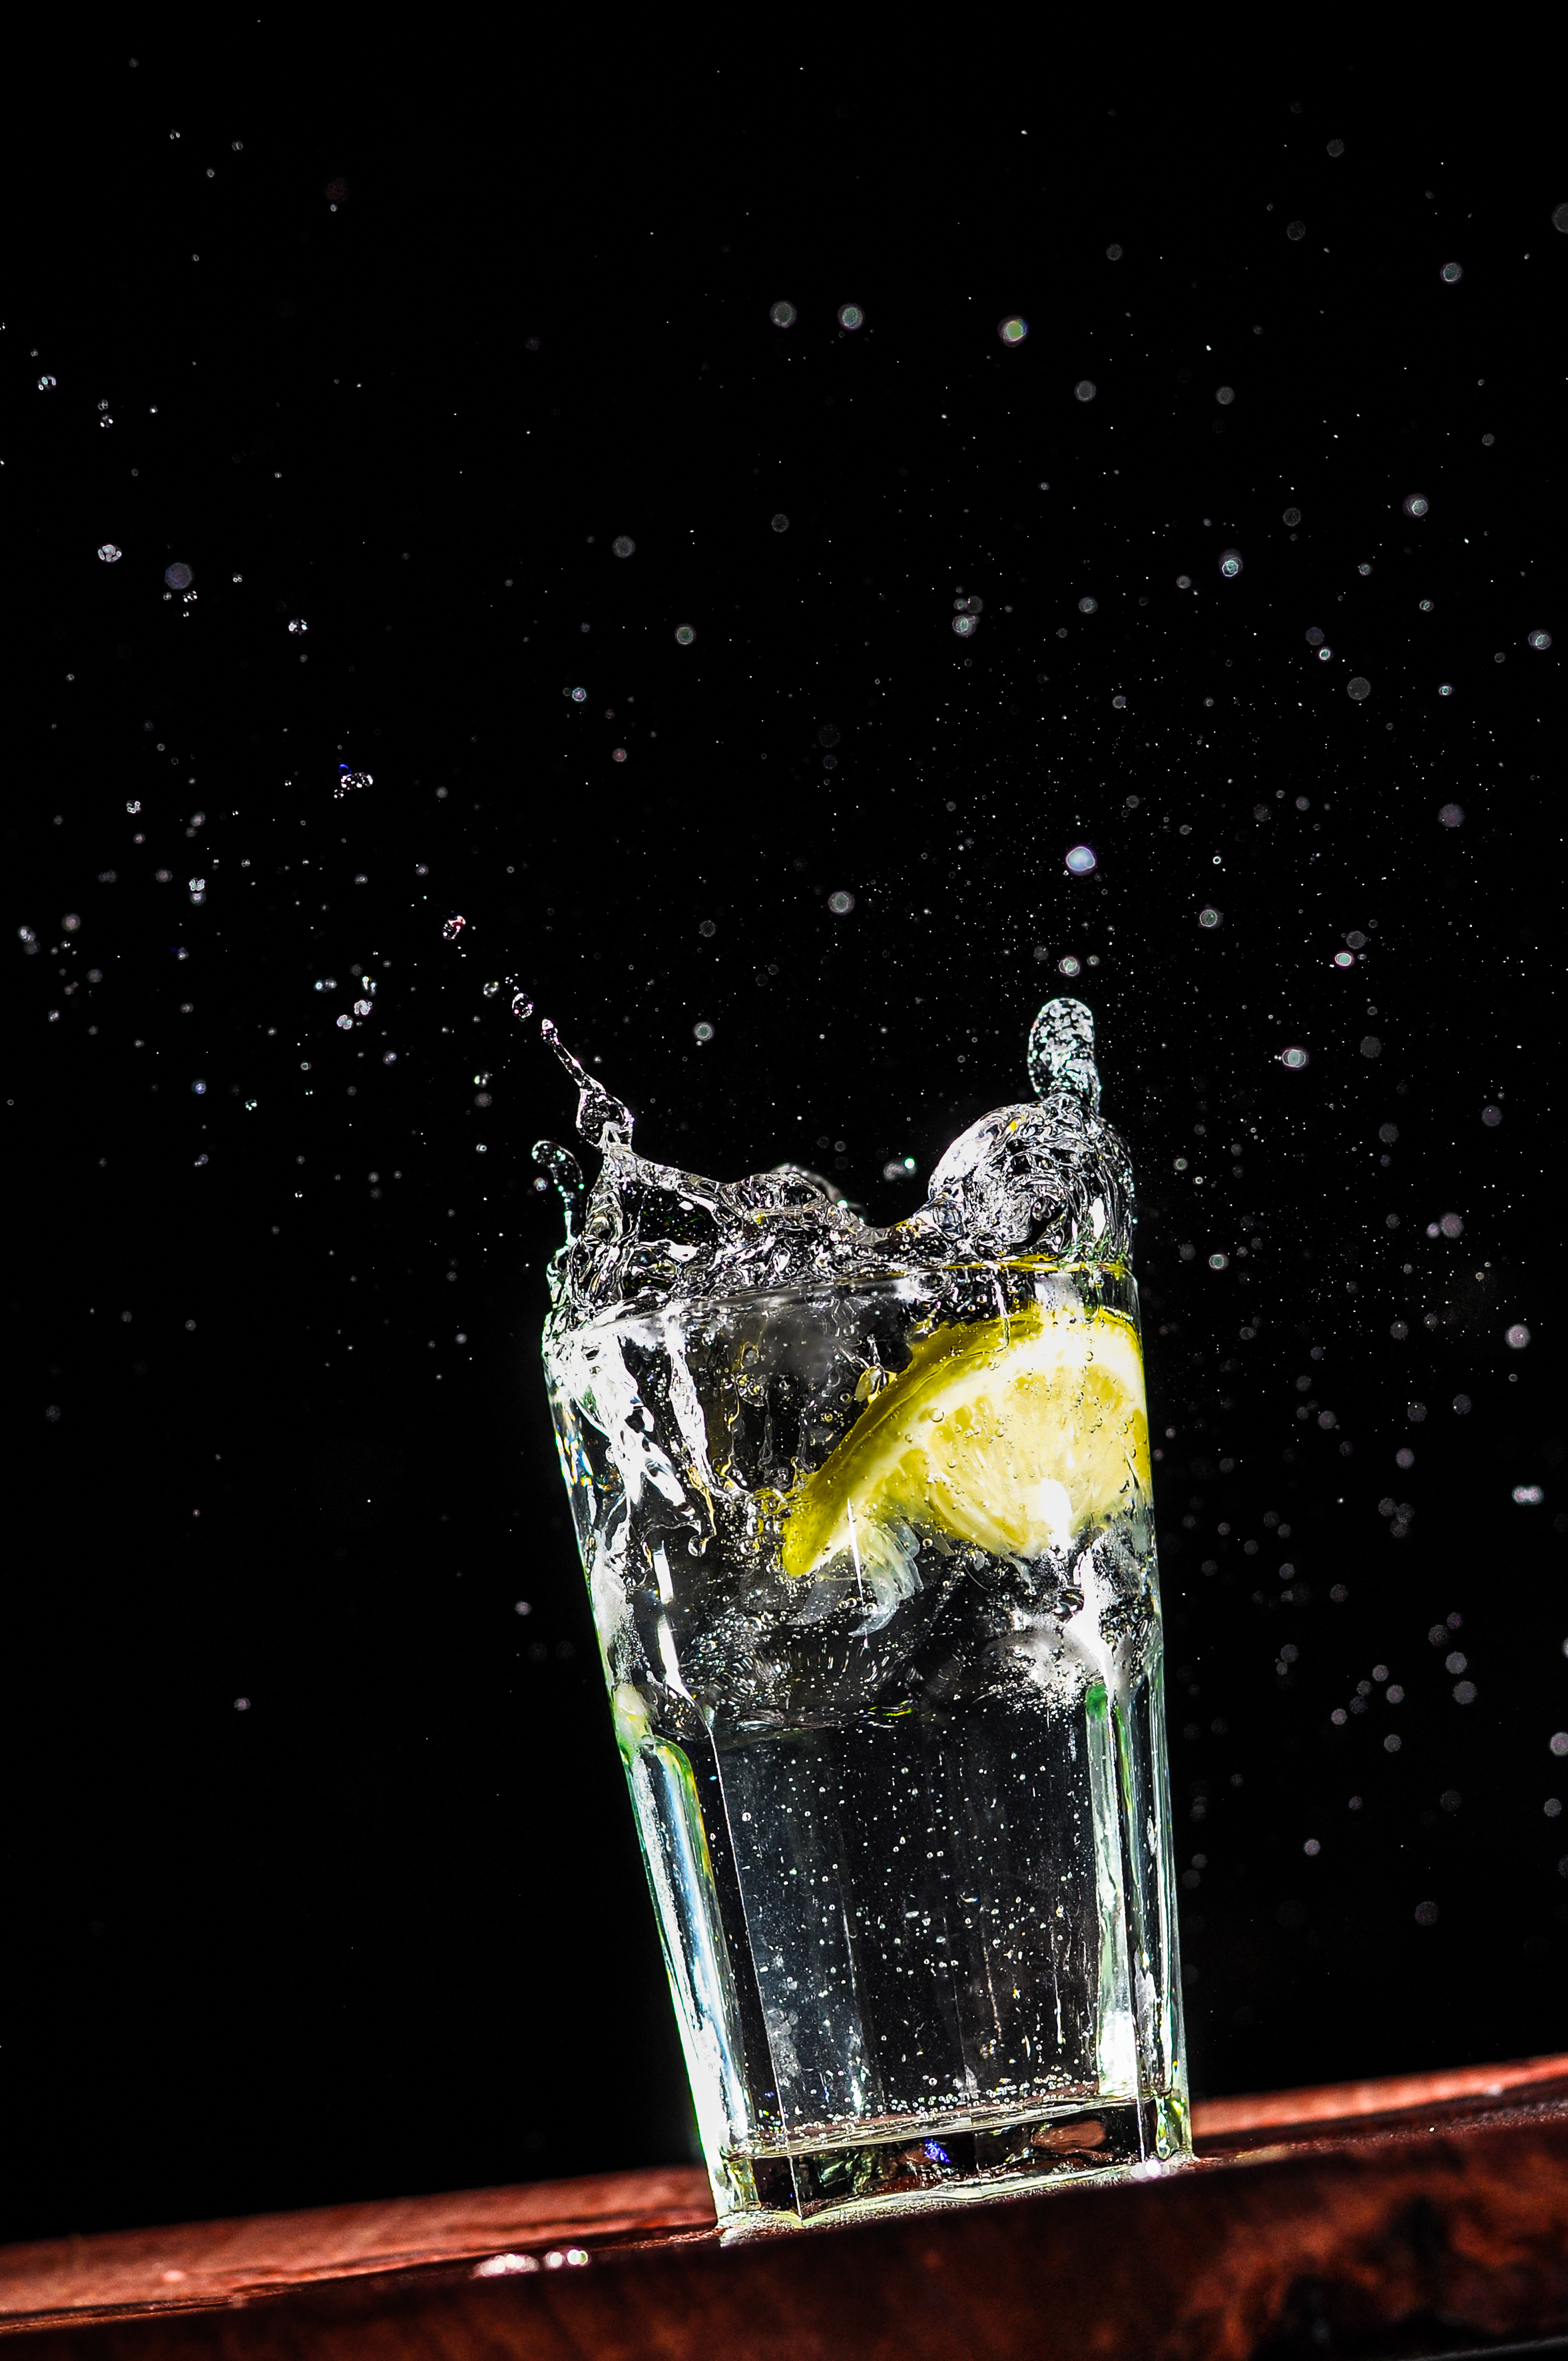 141445 download wallpaper glass, macro, liquid, water, drops, spray, lemon screensavers and pictures for free